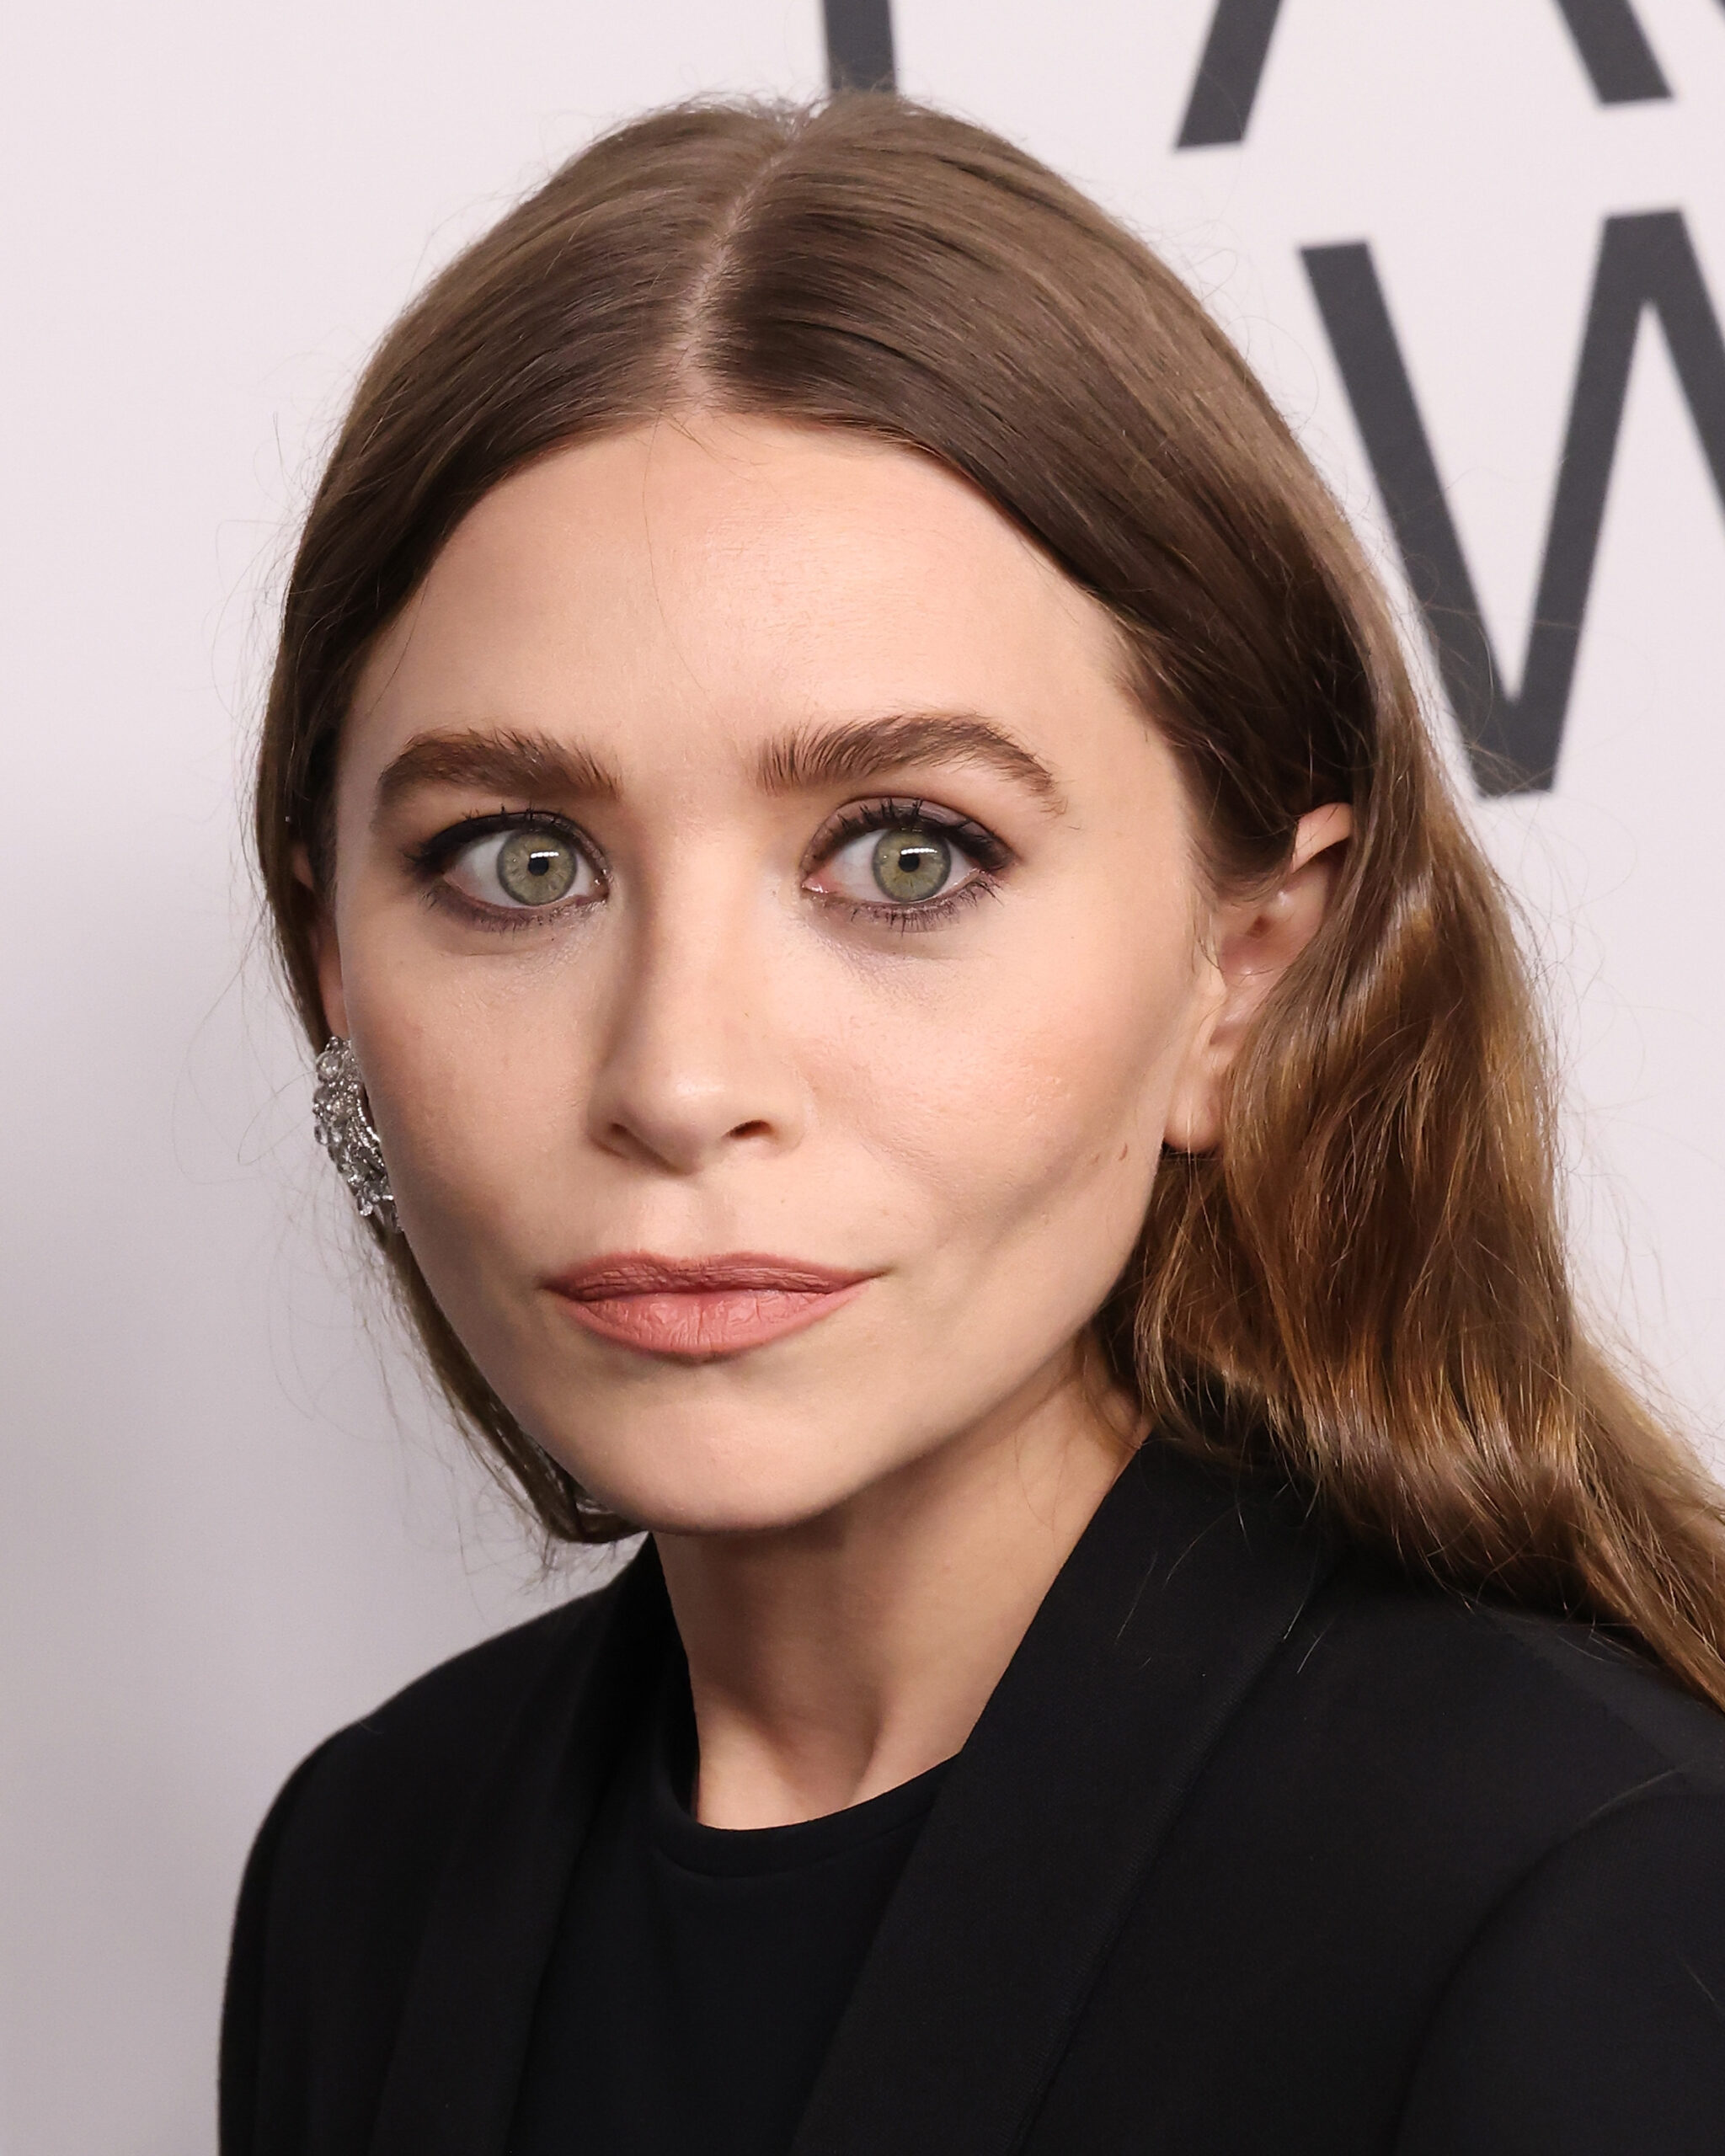 Ashley Olsen at the 2021 CFDA Awards on November 10, 2021, in New York City. | Source: Getty Images